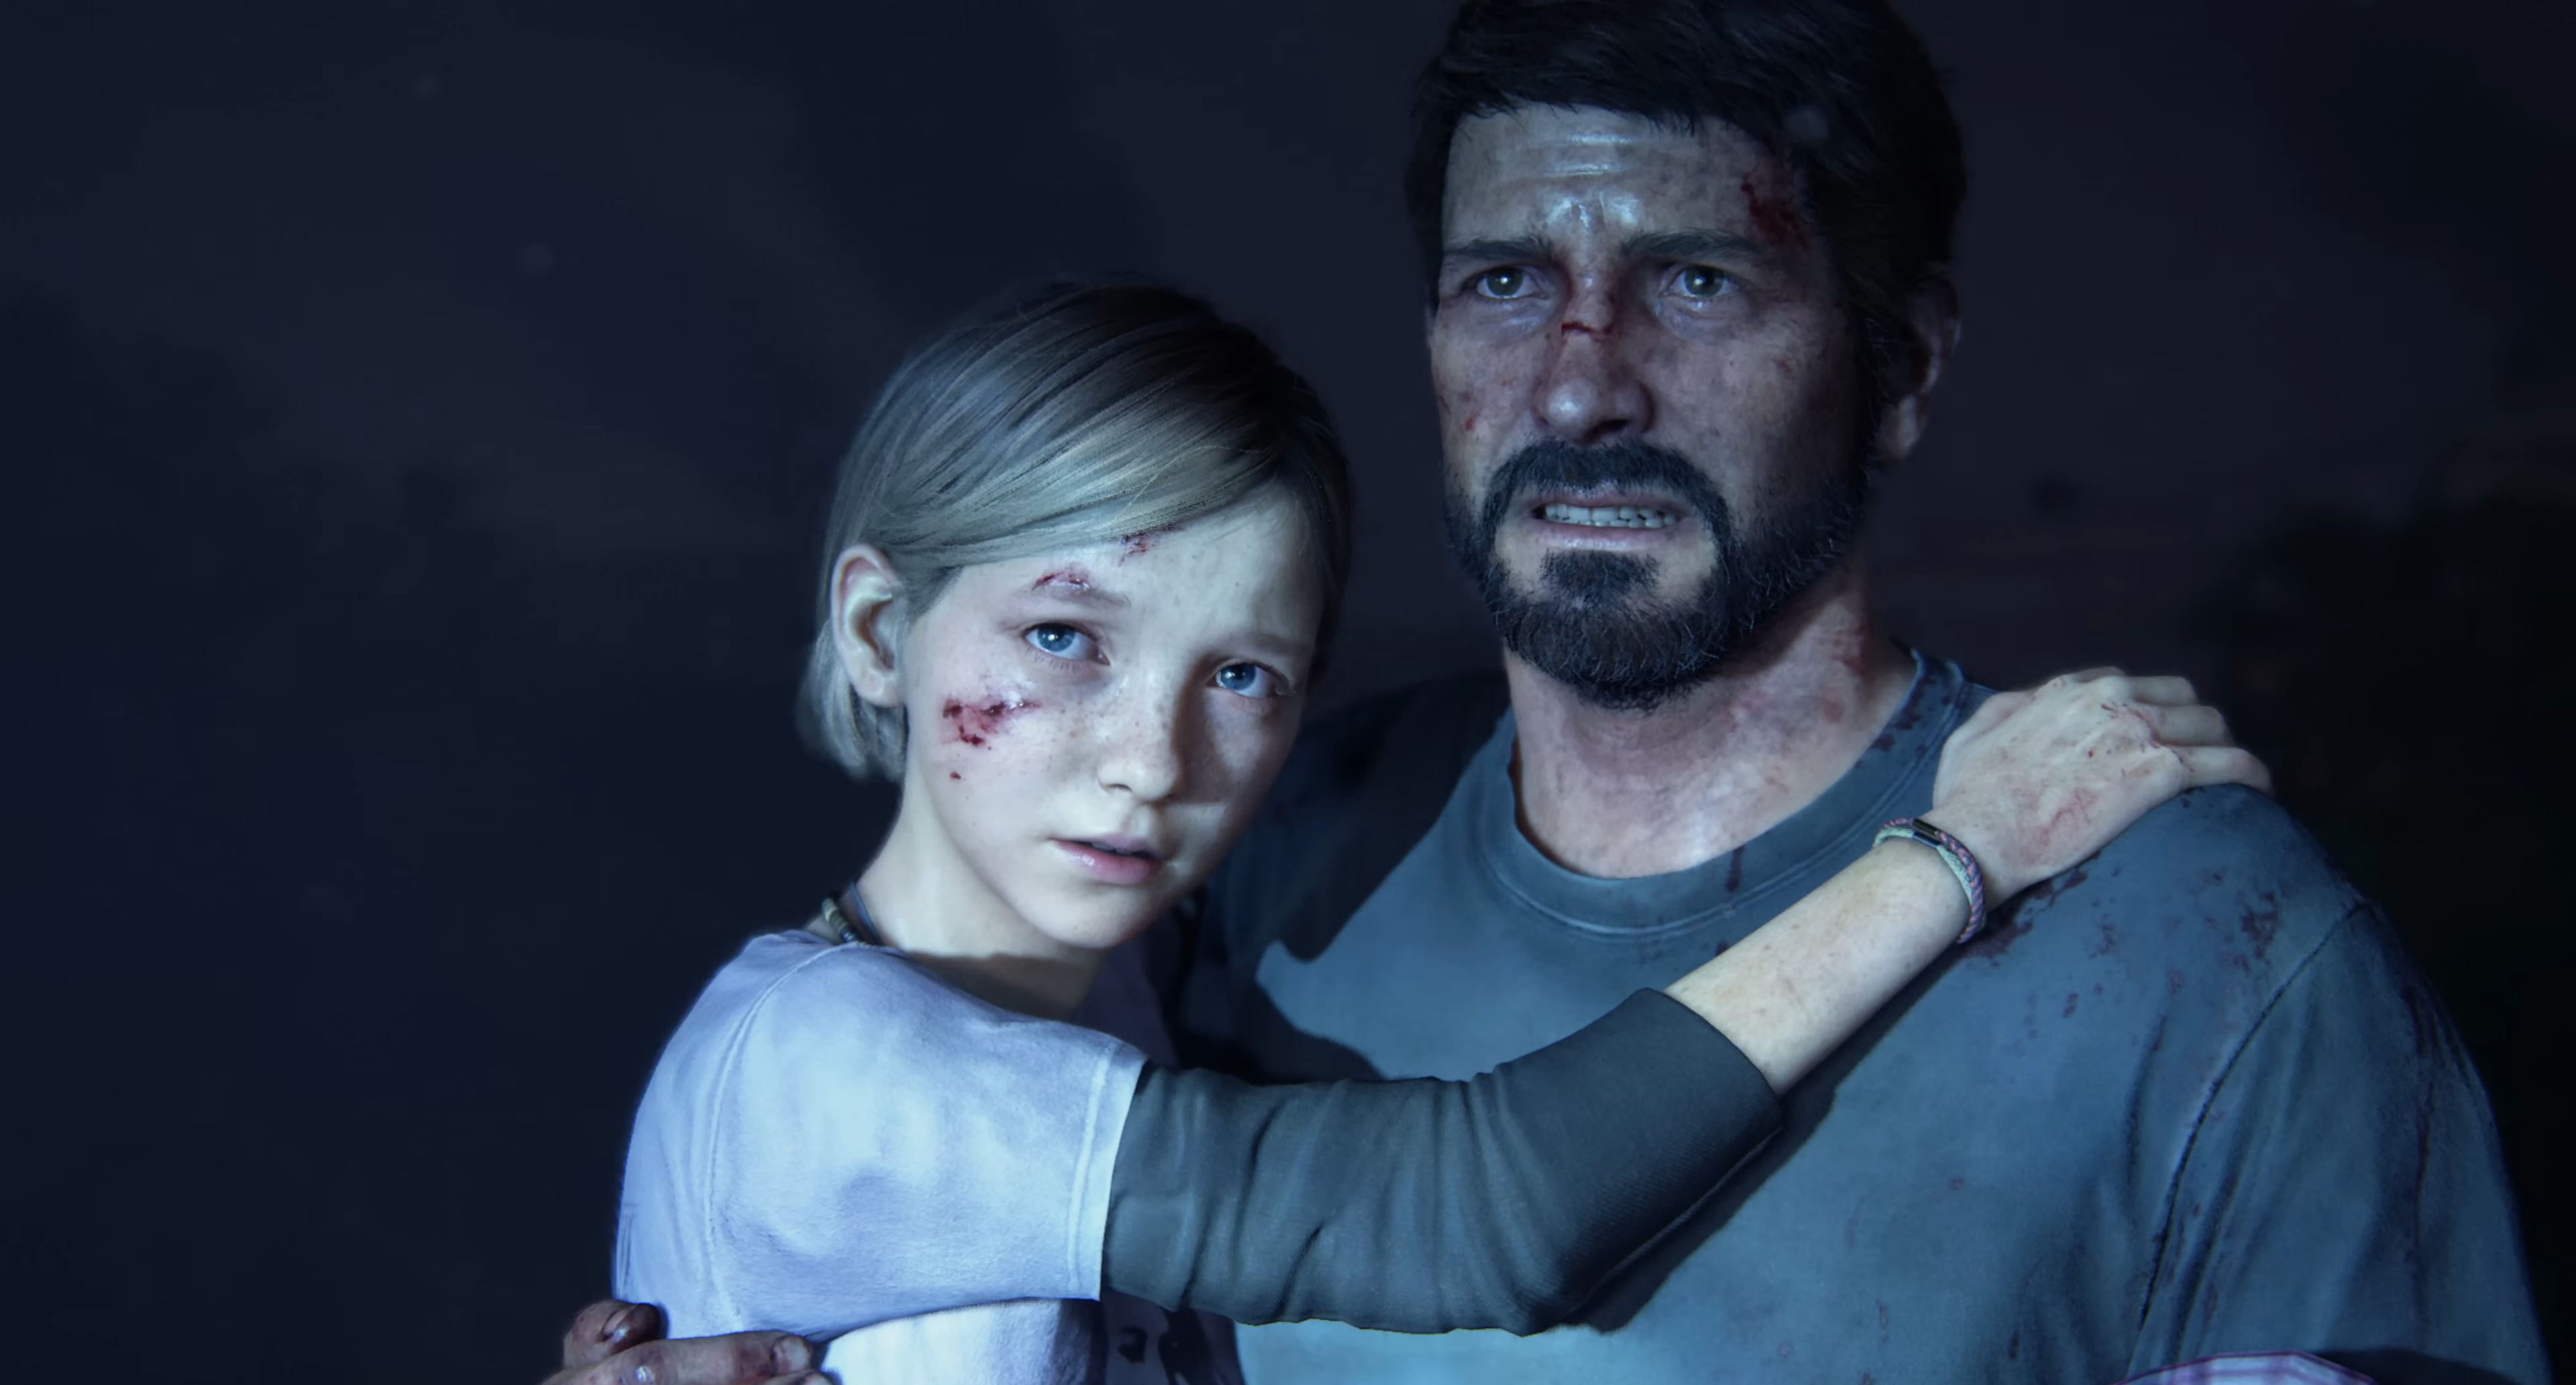 Why The Last of Us Intro Is a Video Game Storytelling Masterpiece